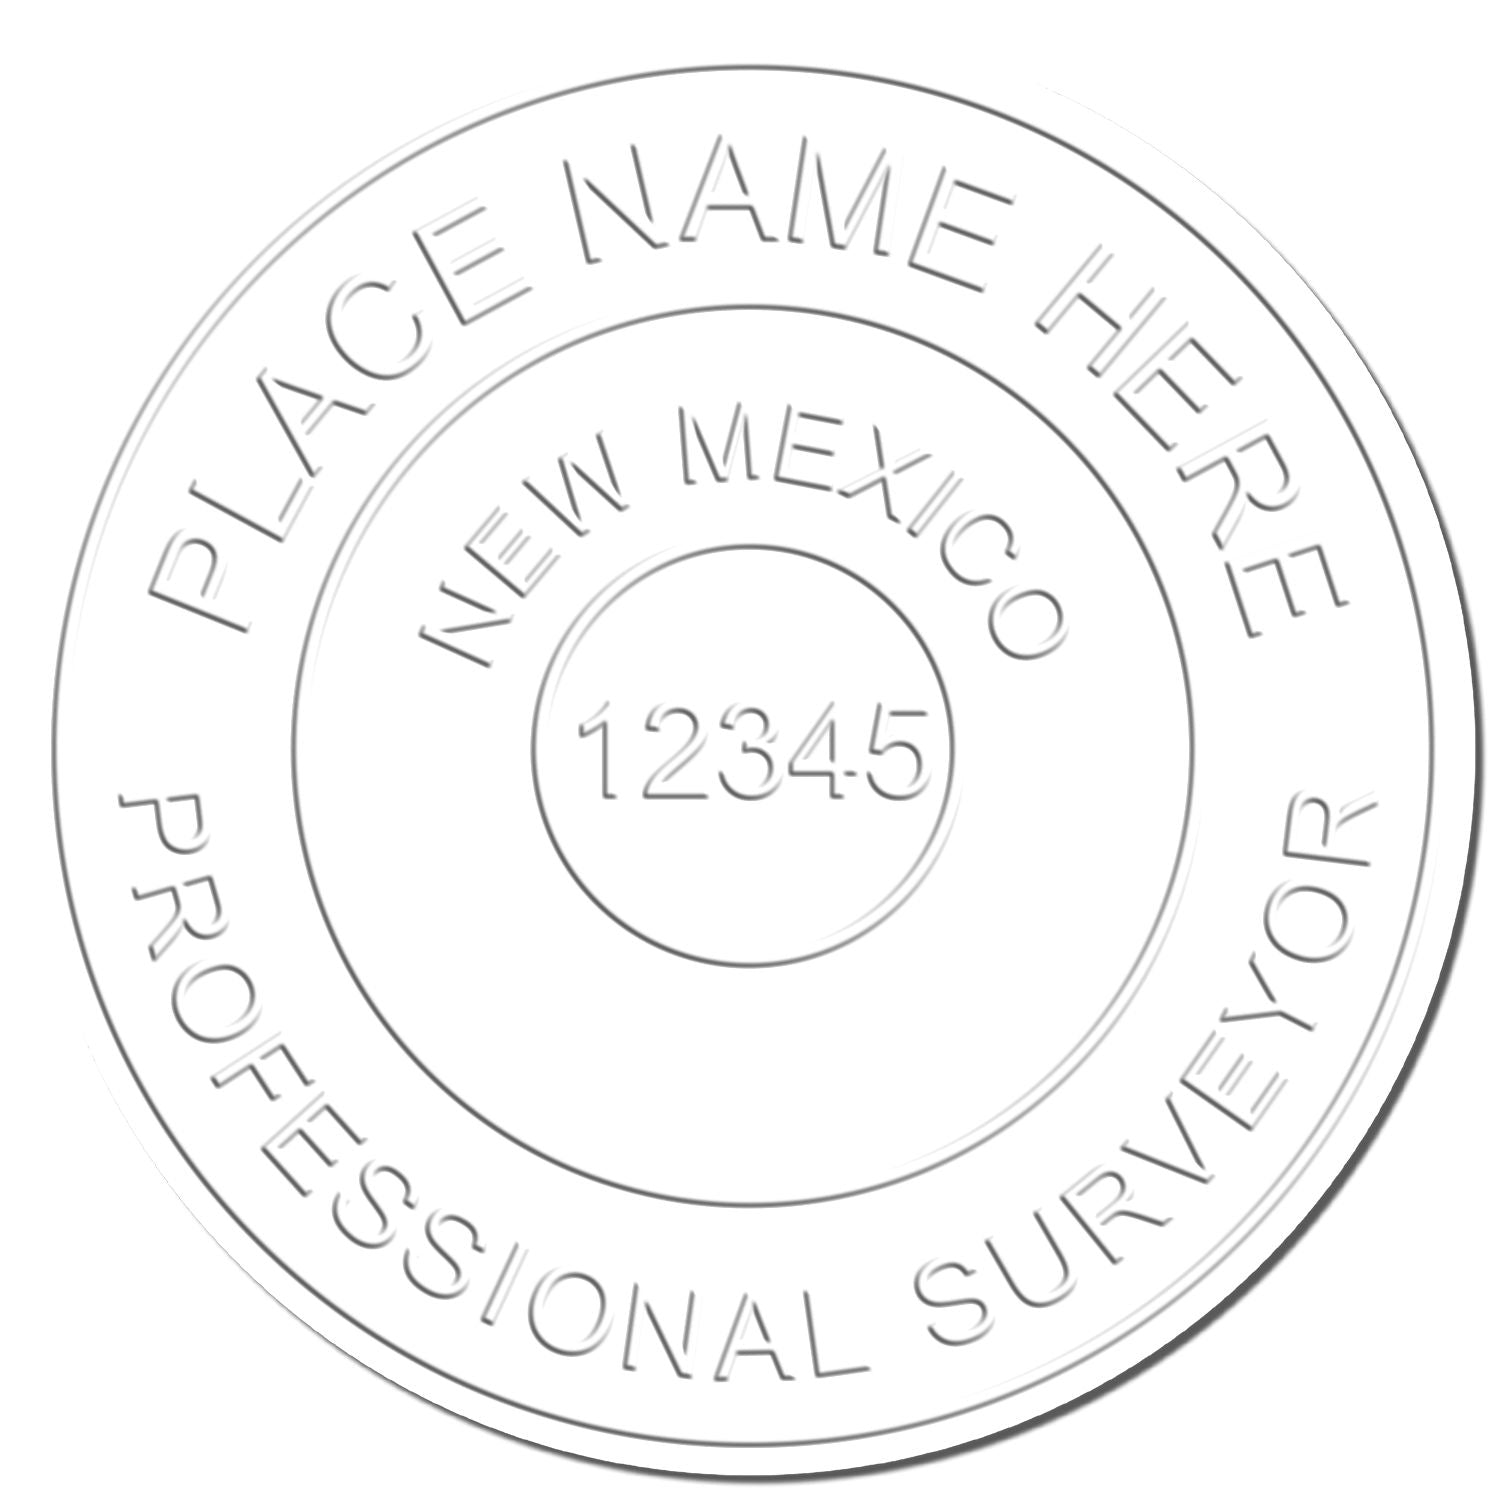 This paper is stamped with a sample imprint of the New Mexico Desk Surveyor Seal Embosser, signifying its quality and reliability.